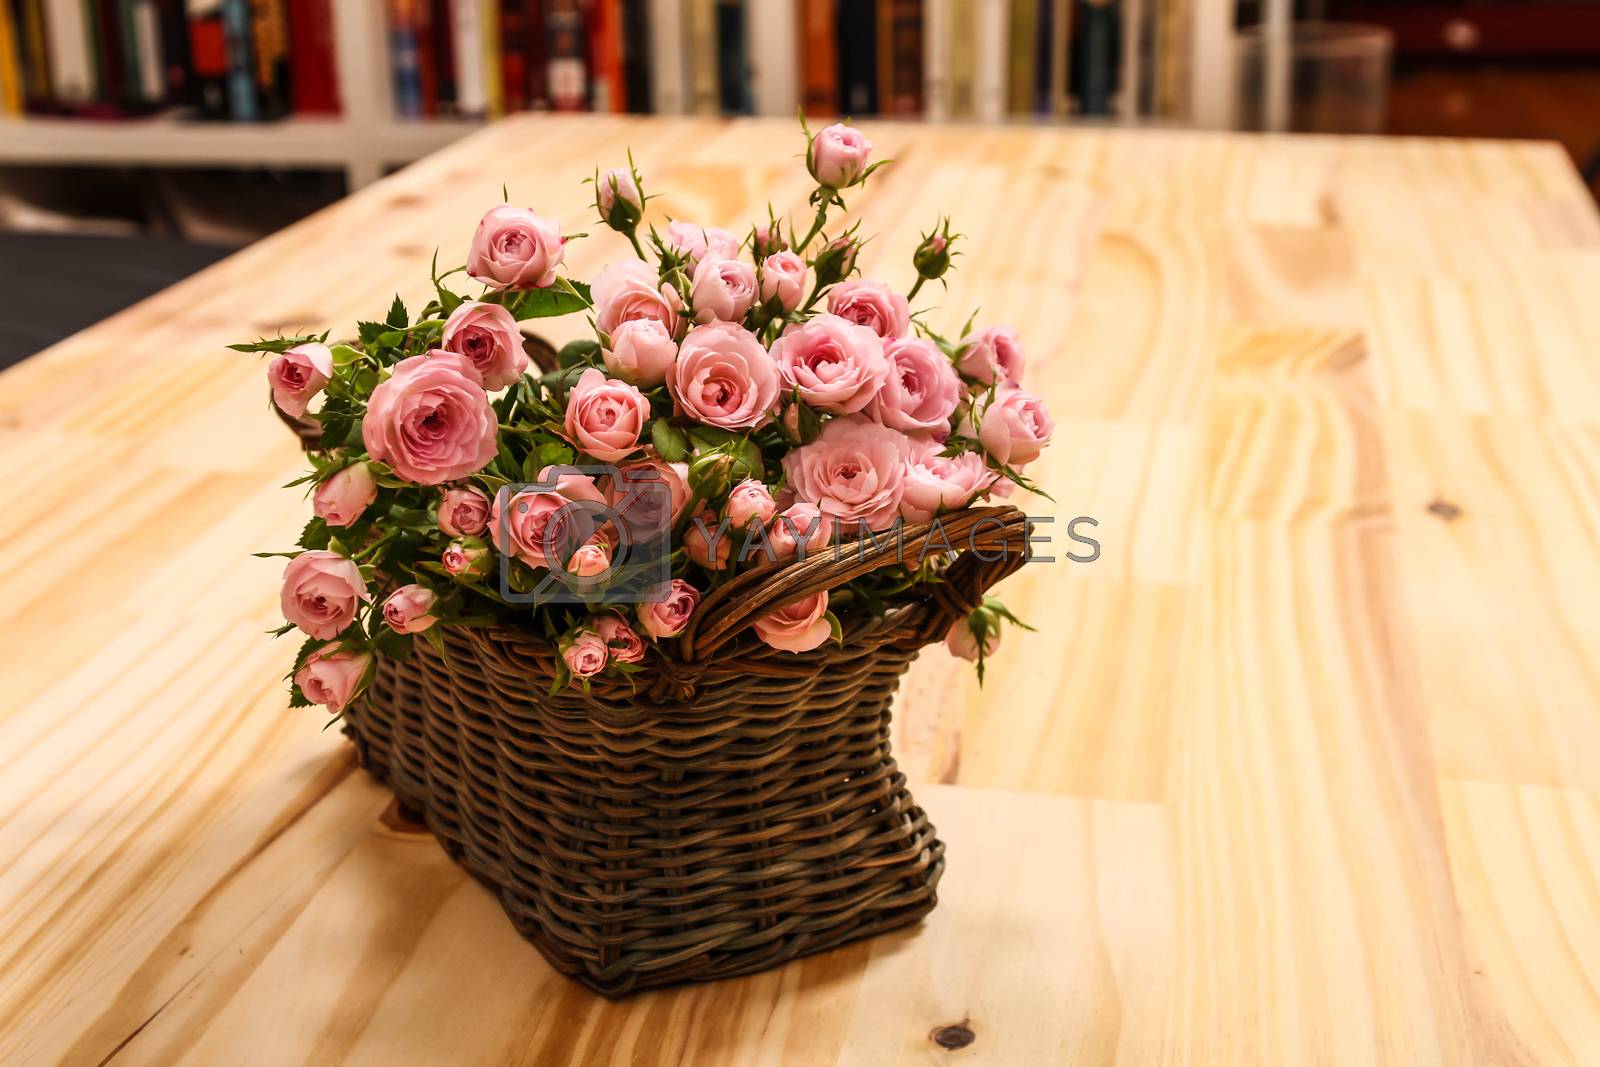 Royalty free image of Roses in a basket by conejota